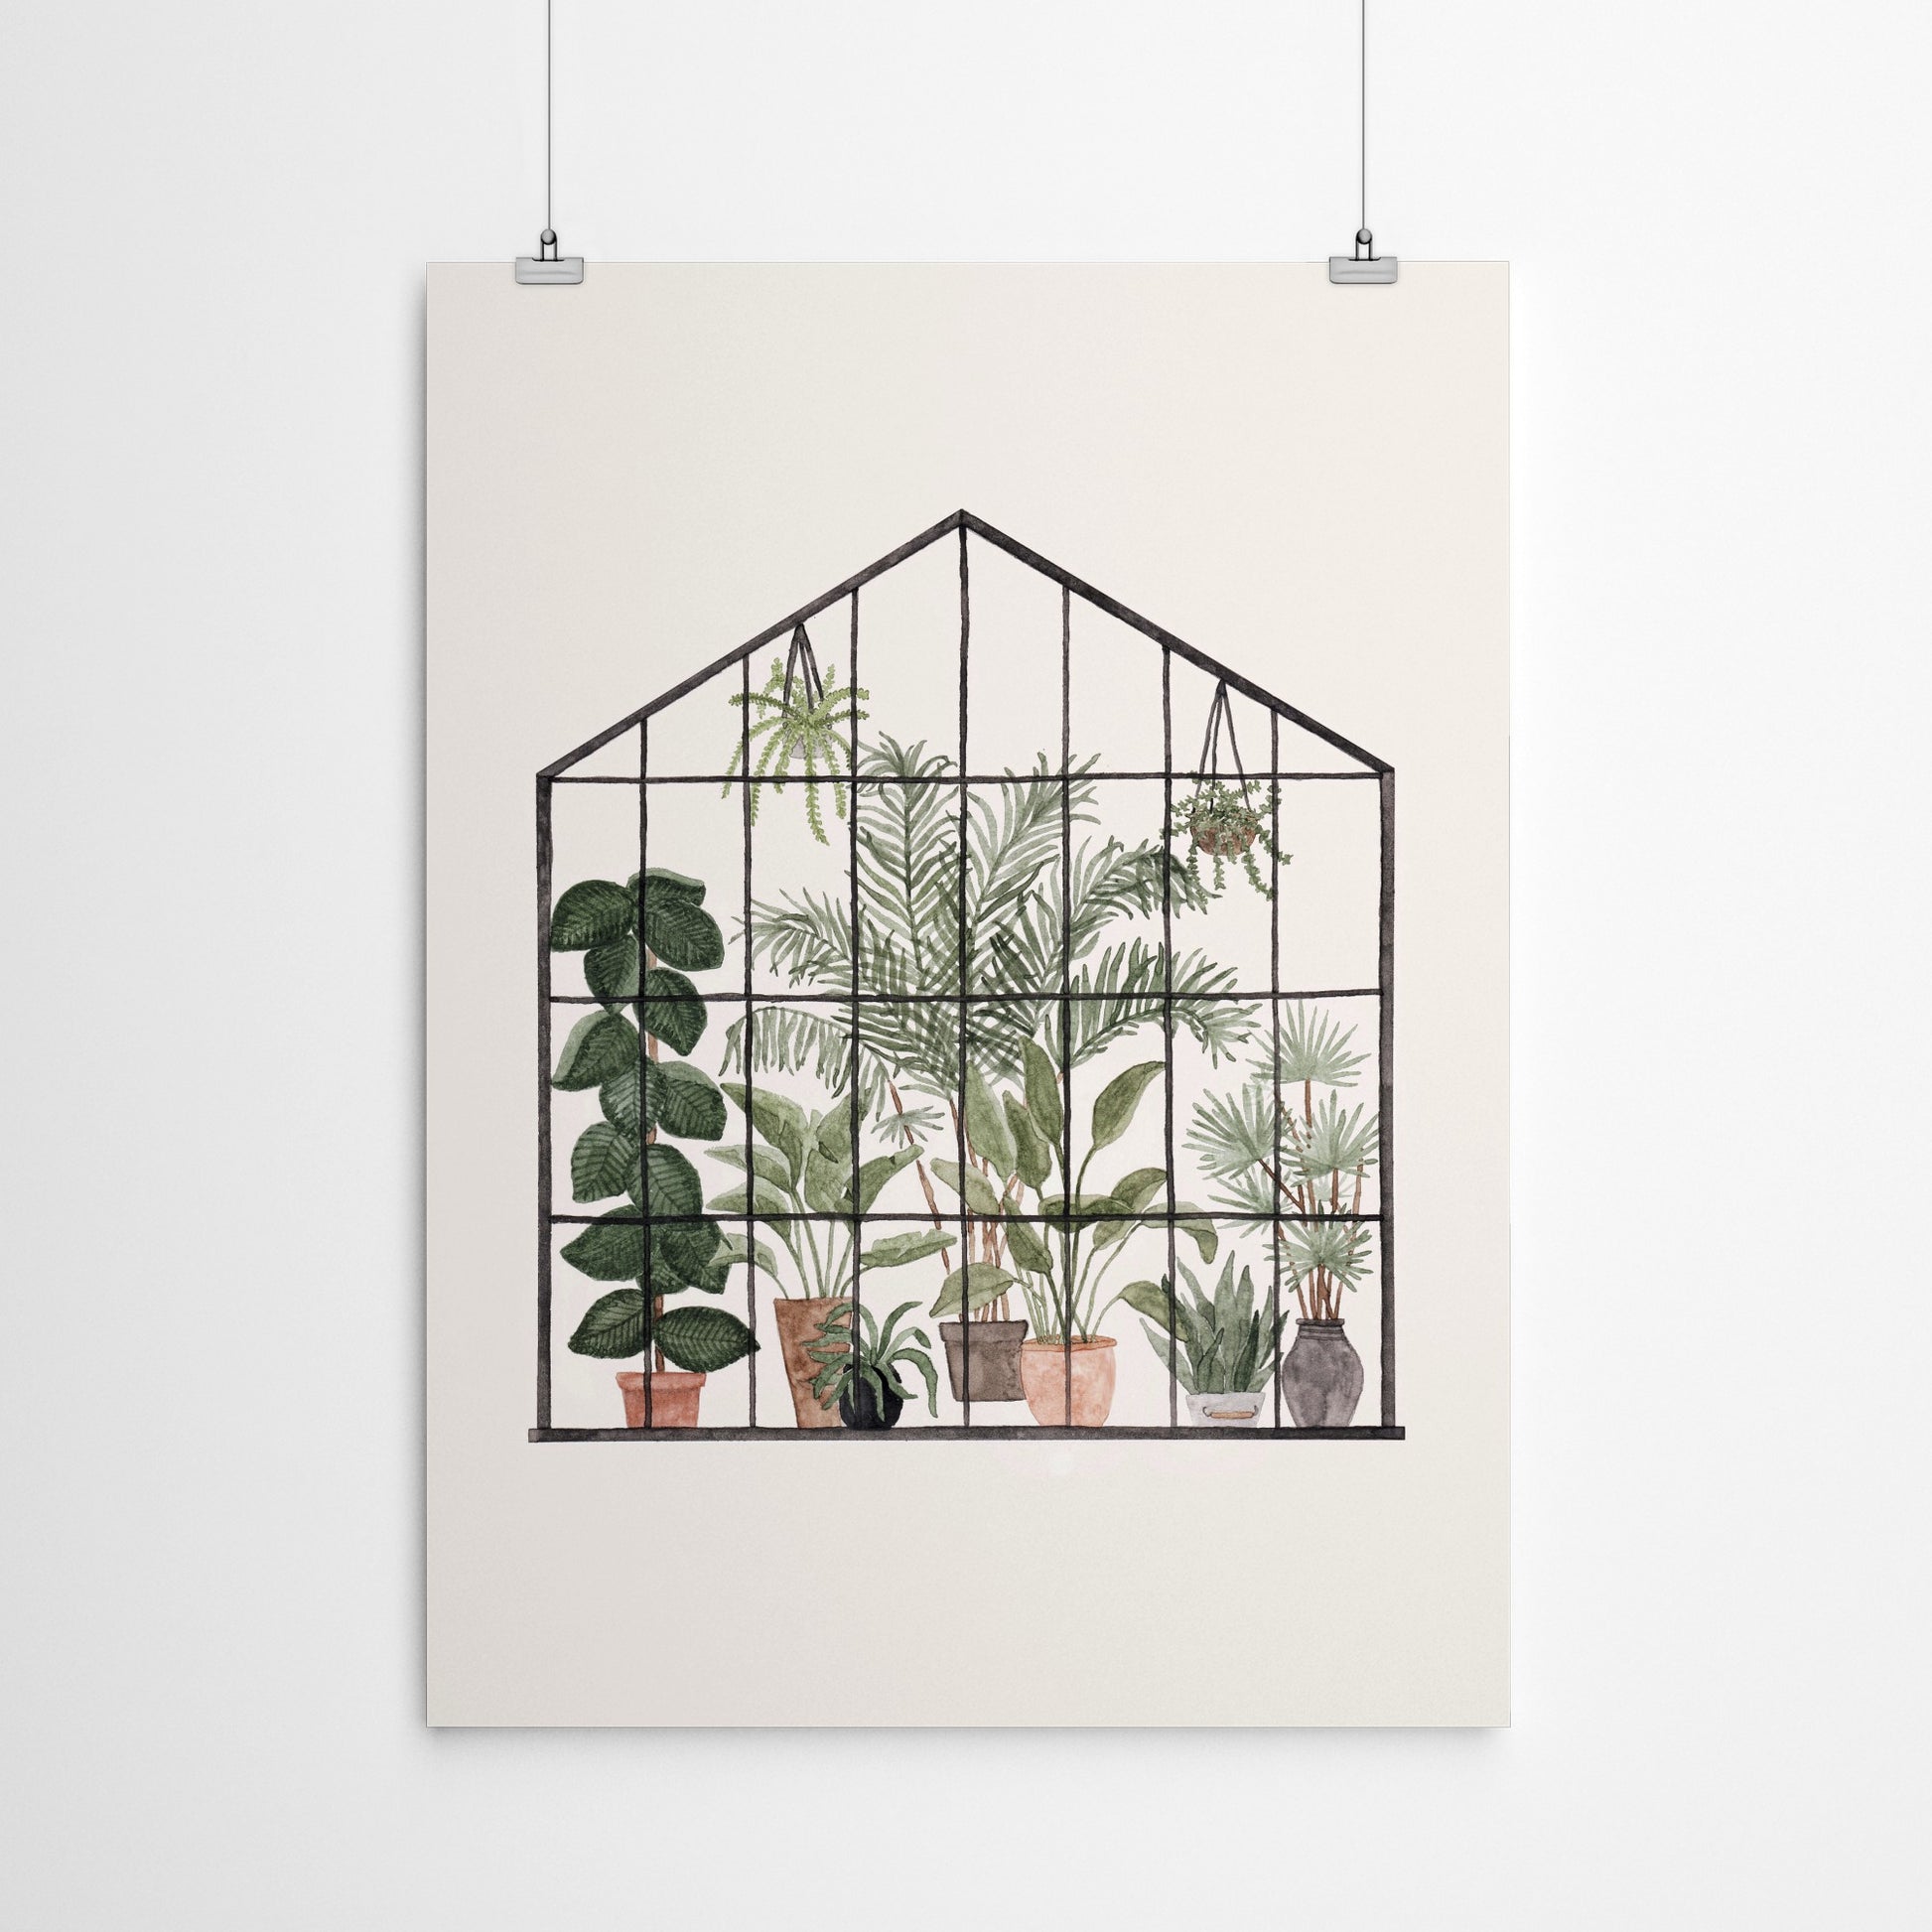 Greenhouse by Antonia Jurgens - Poster, Poster, 22" X 28"